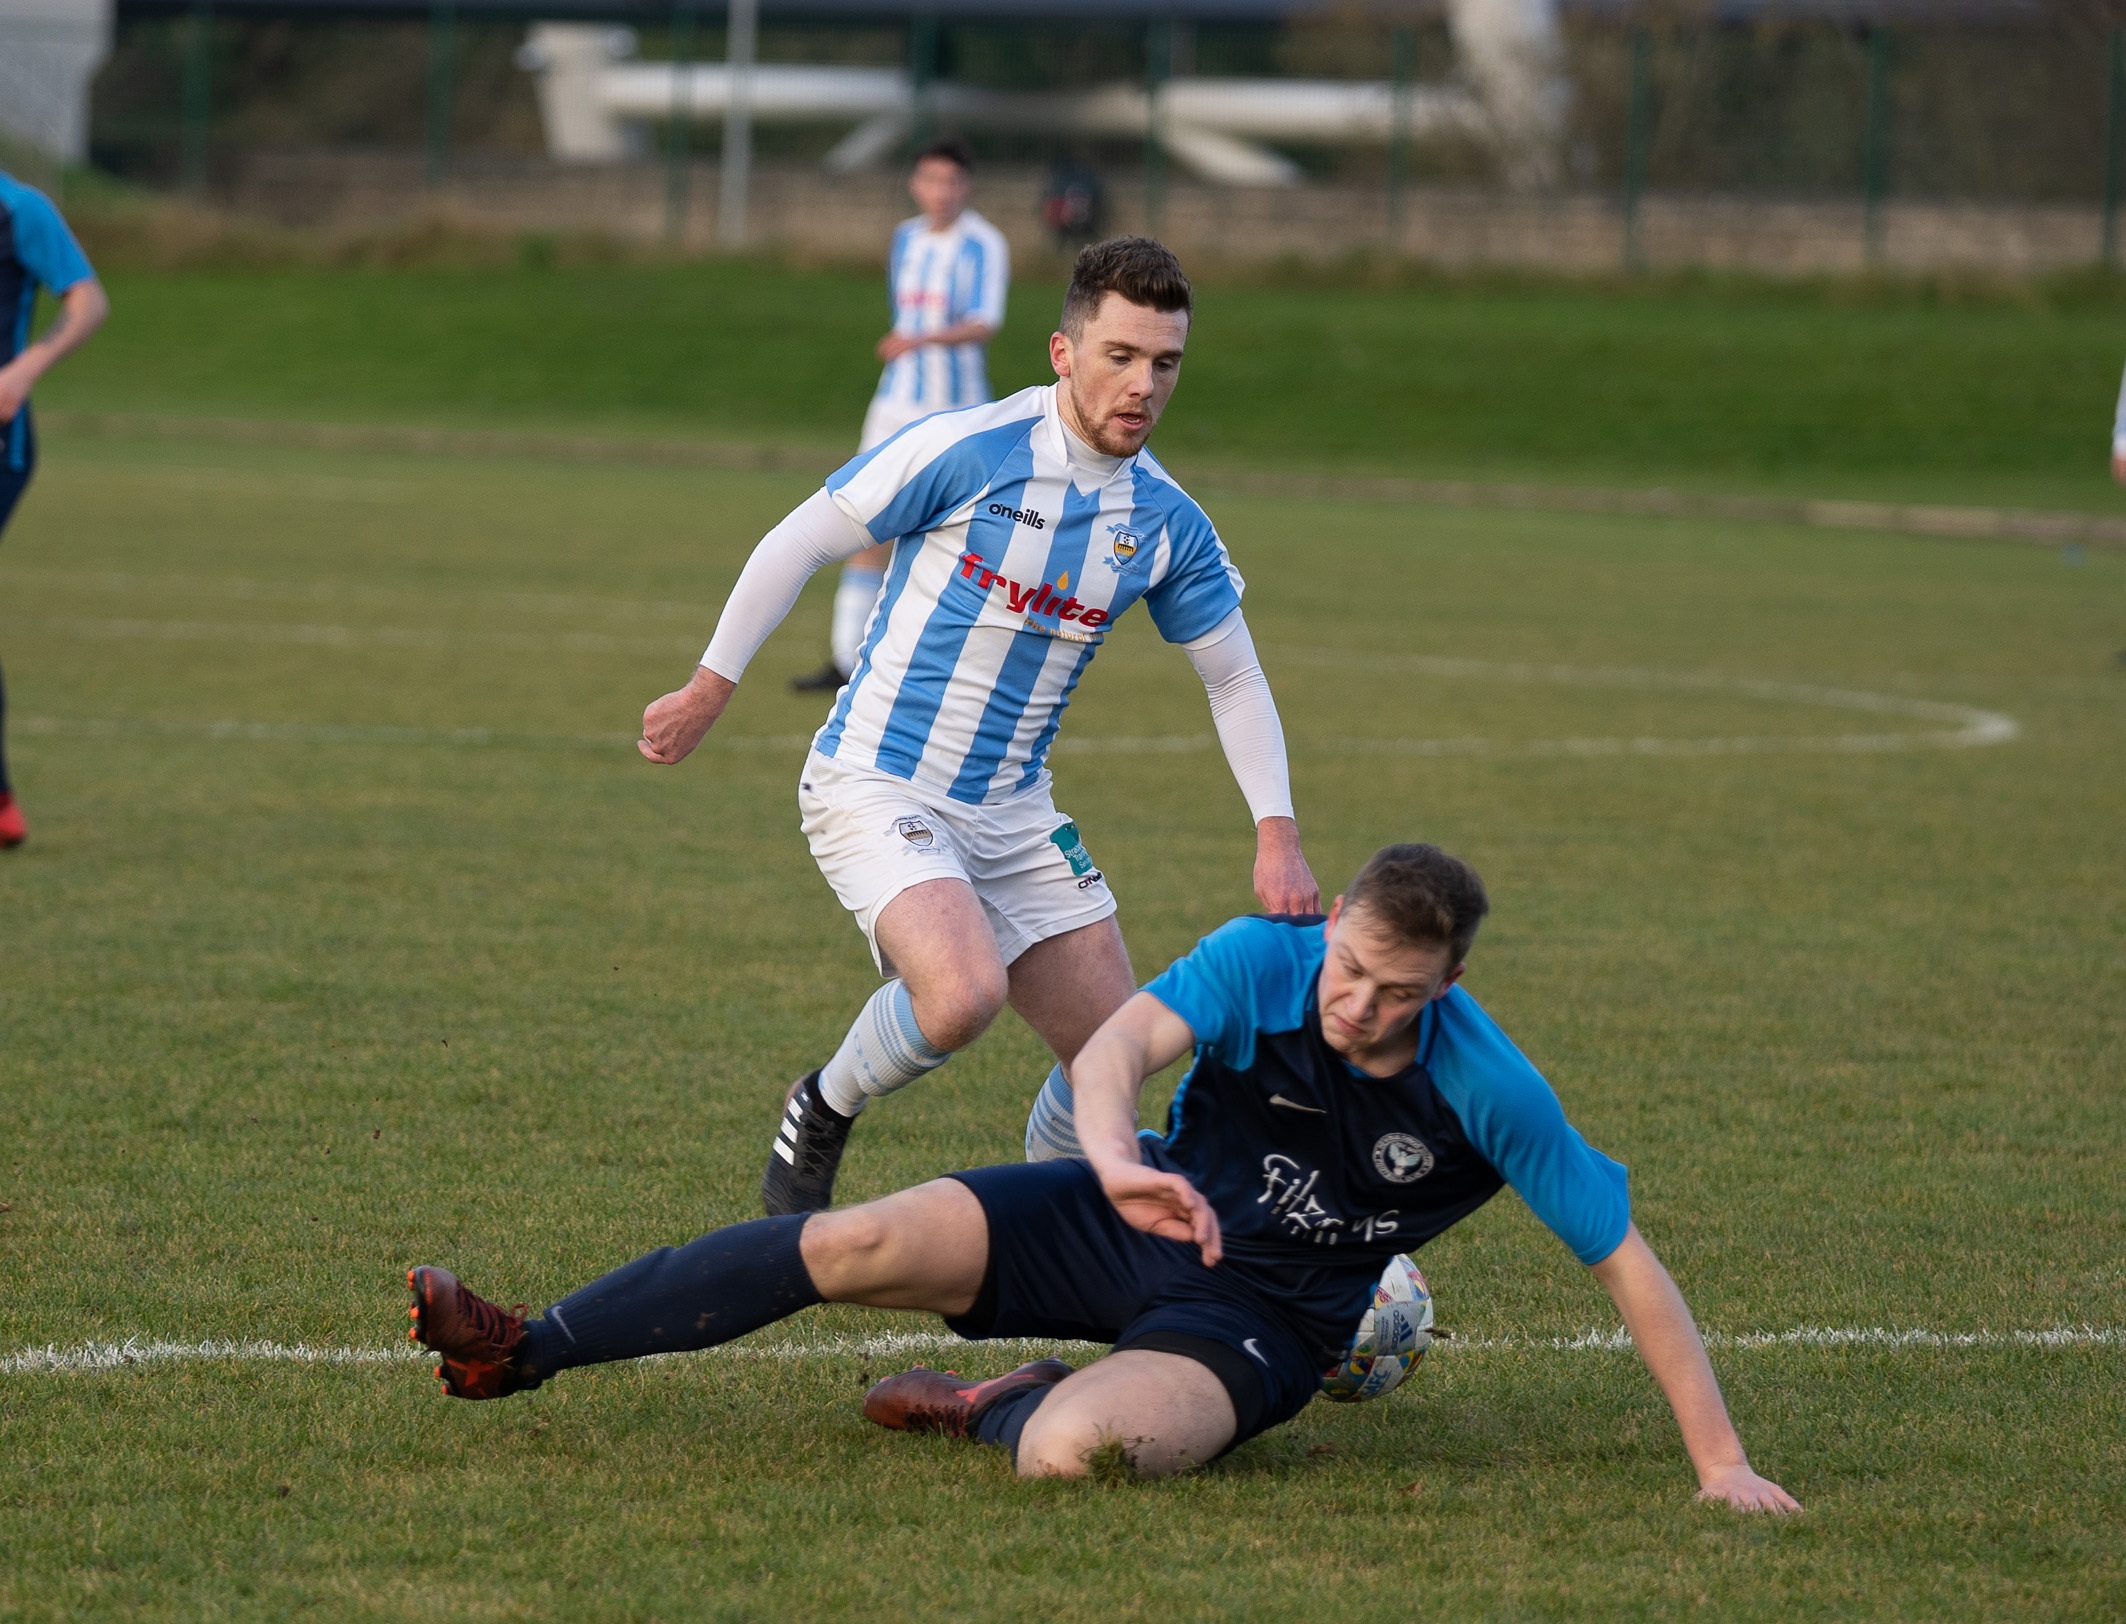 Patterson looking to build momentum after Strabane book cup final place